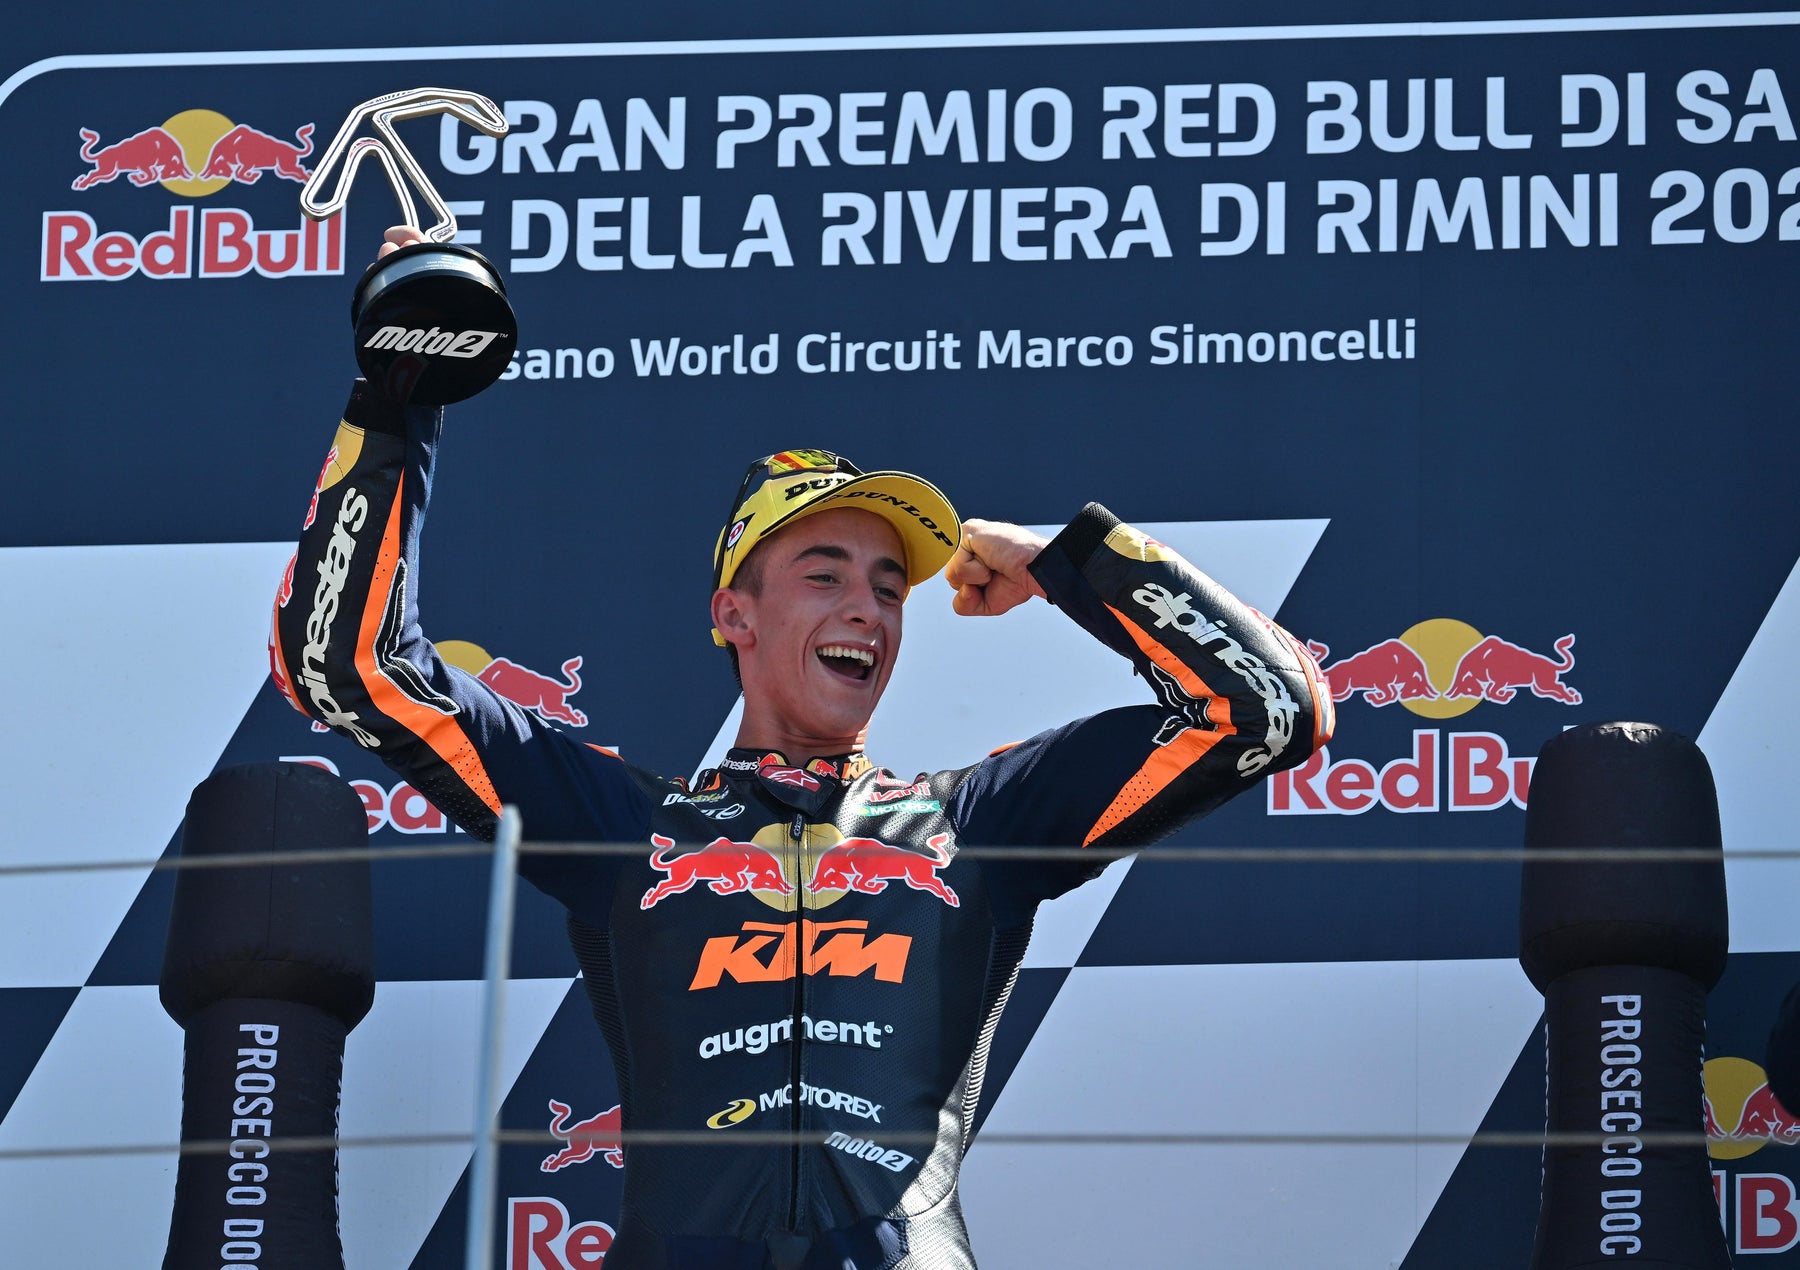 PEDRO ACOSTA SETS BLISTERING PACE TO TAKE MOTO2 VICTORY AND EXTEND HIS CHAMPIONSHIP LEAD IN MISANO